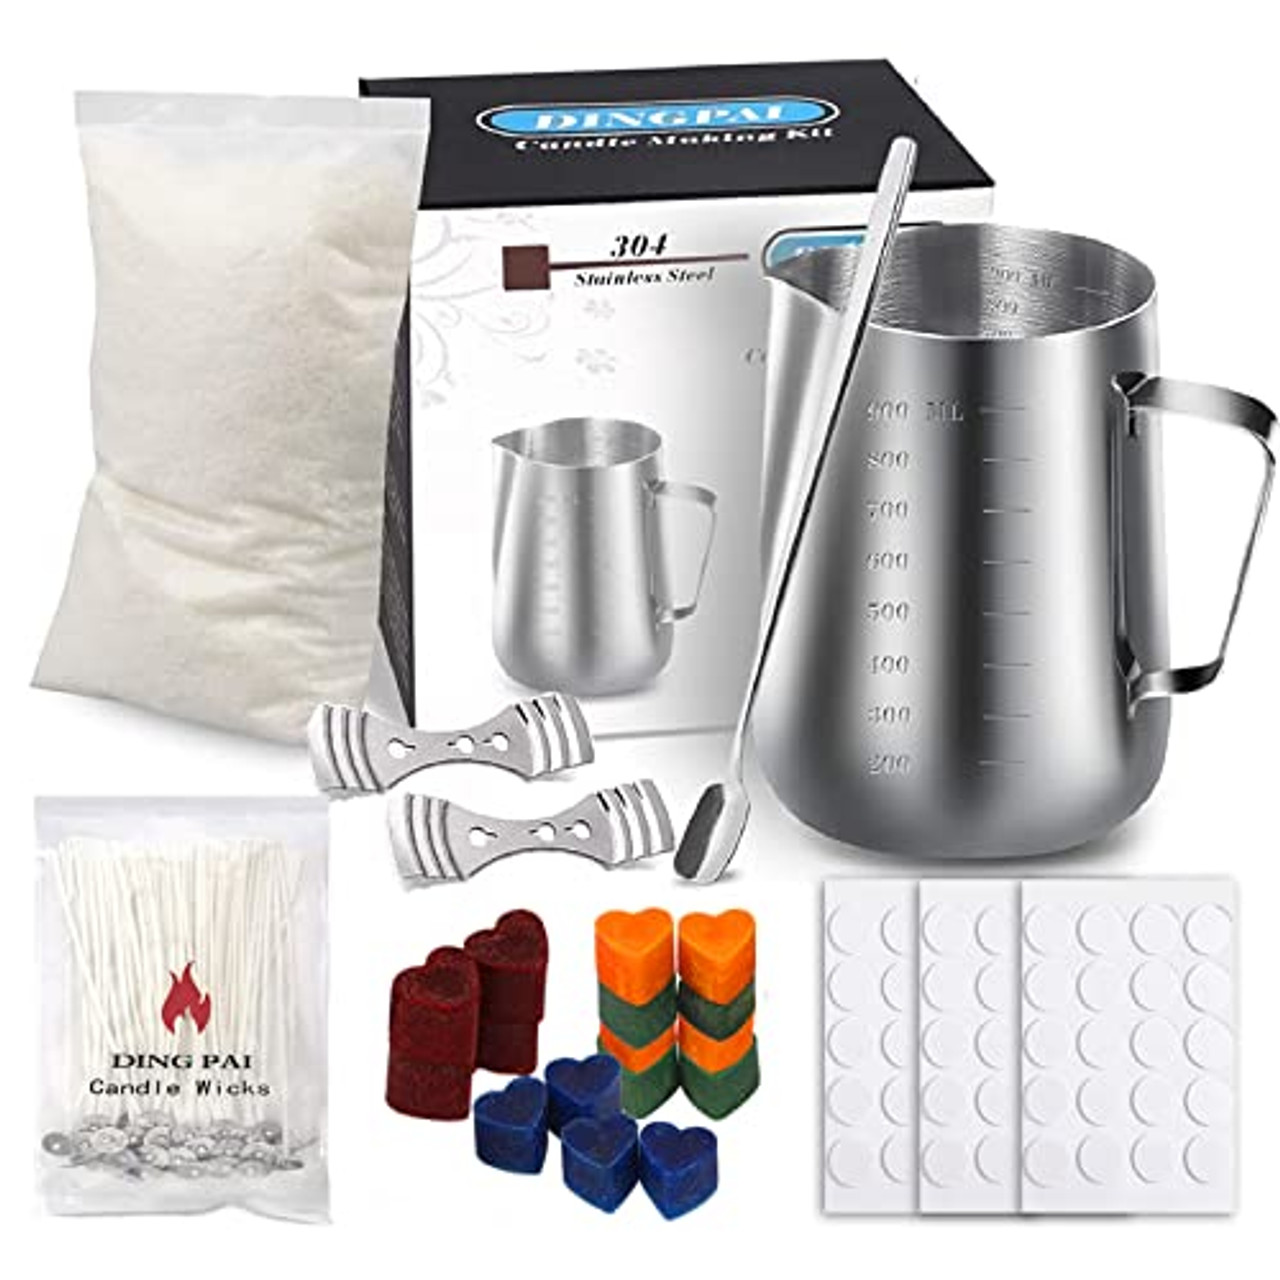 Candle Making Supplies, Complete Soy Candle Making Set Including